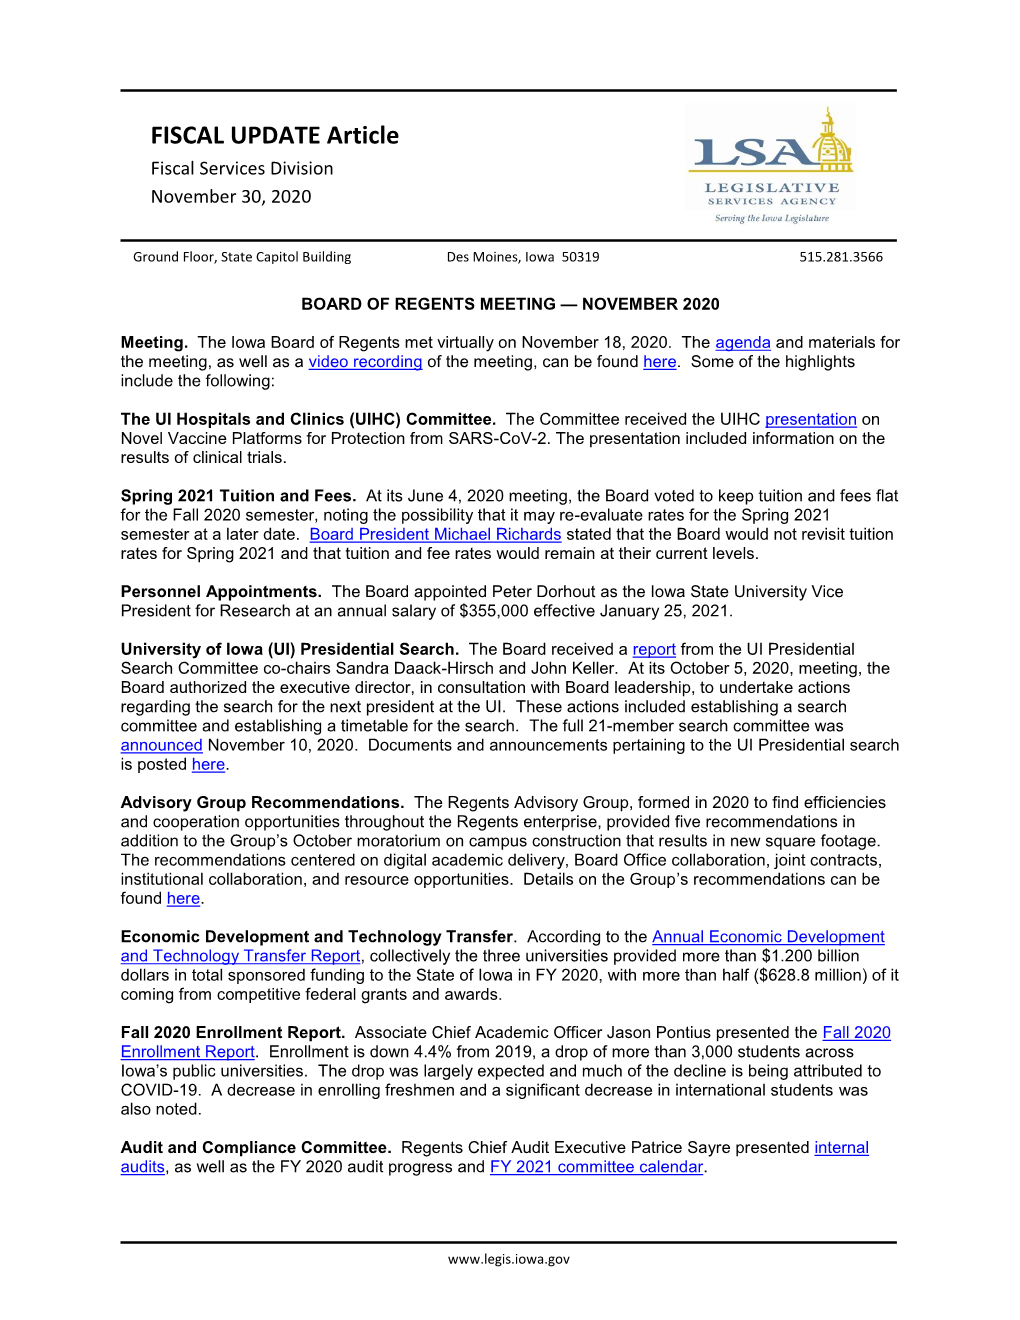 FISCAL UPDATE Article Fiscal Services Division November 30, 2020